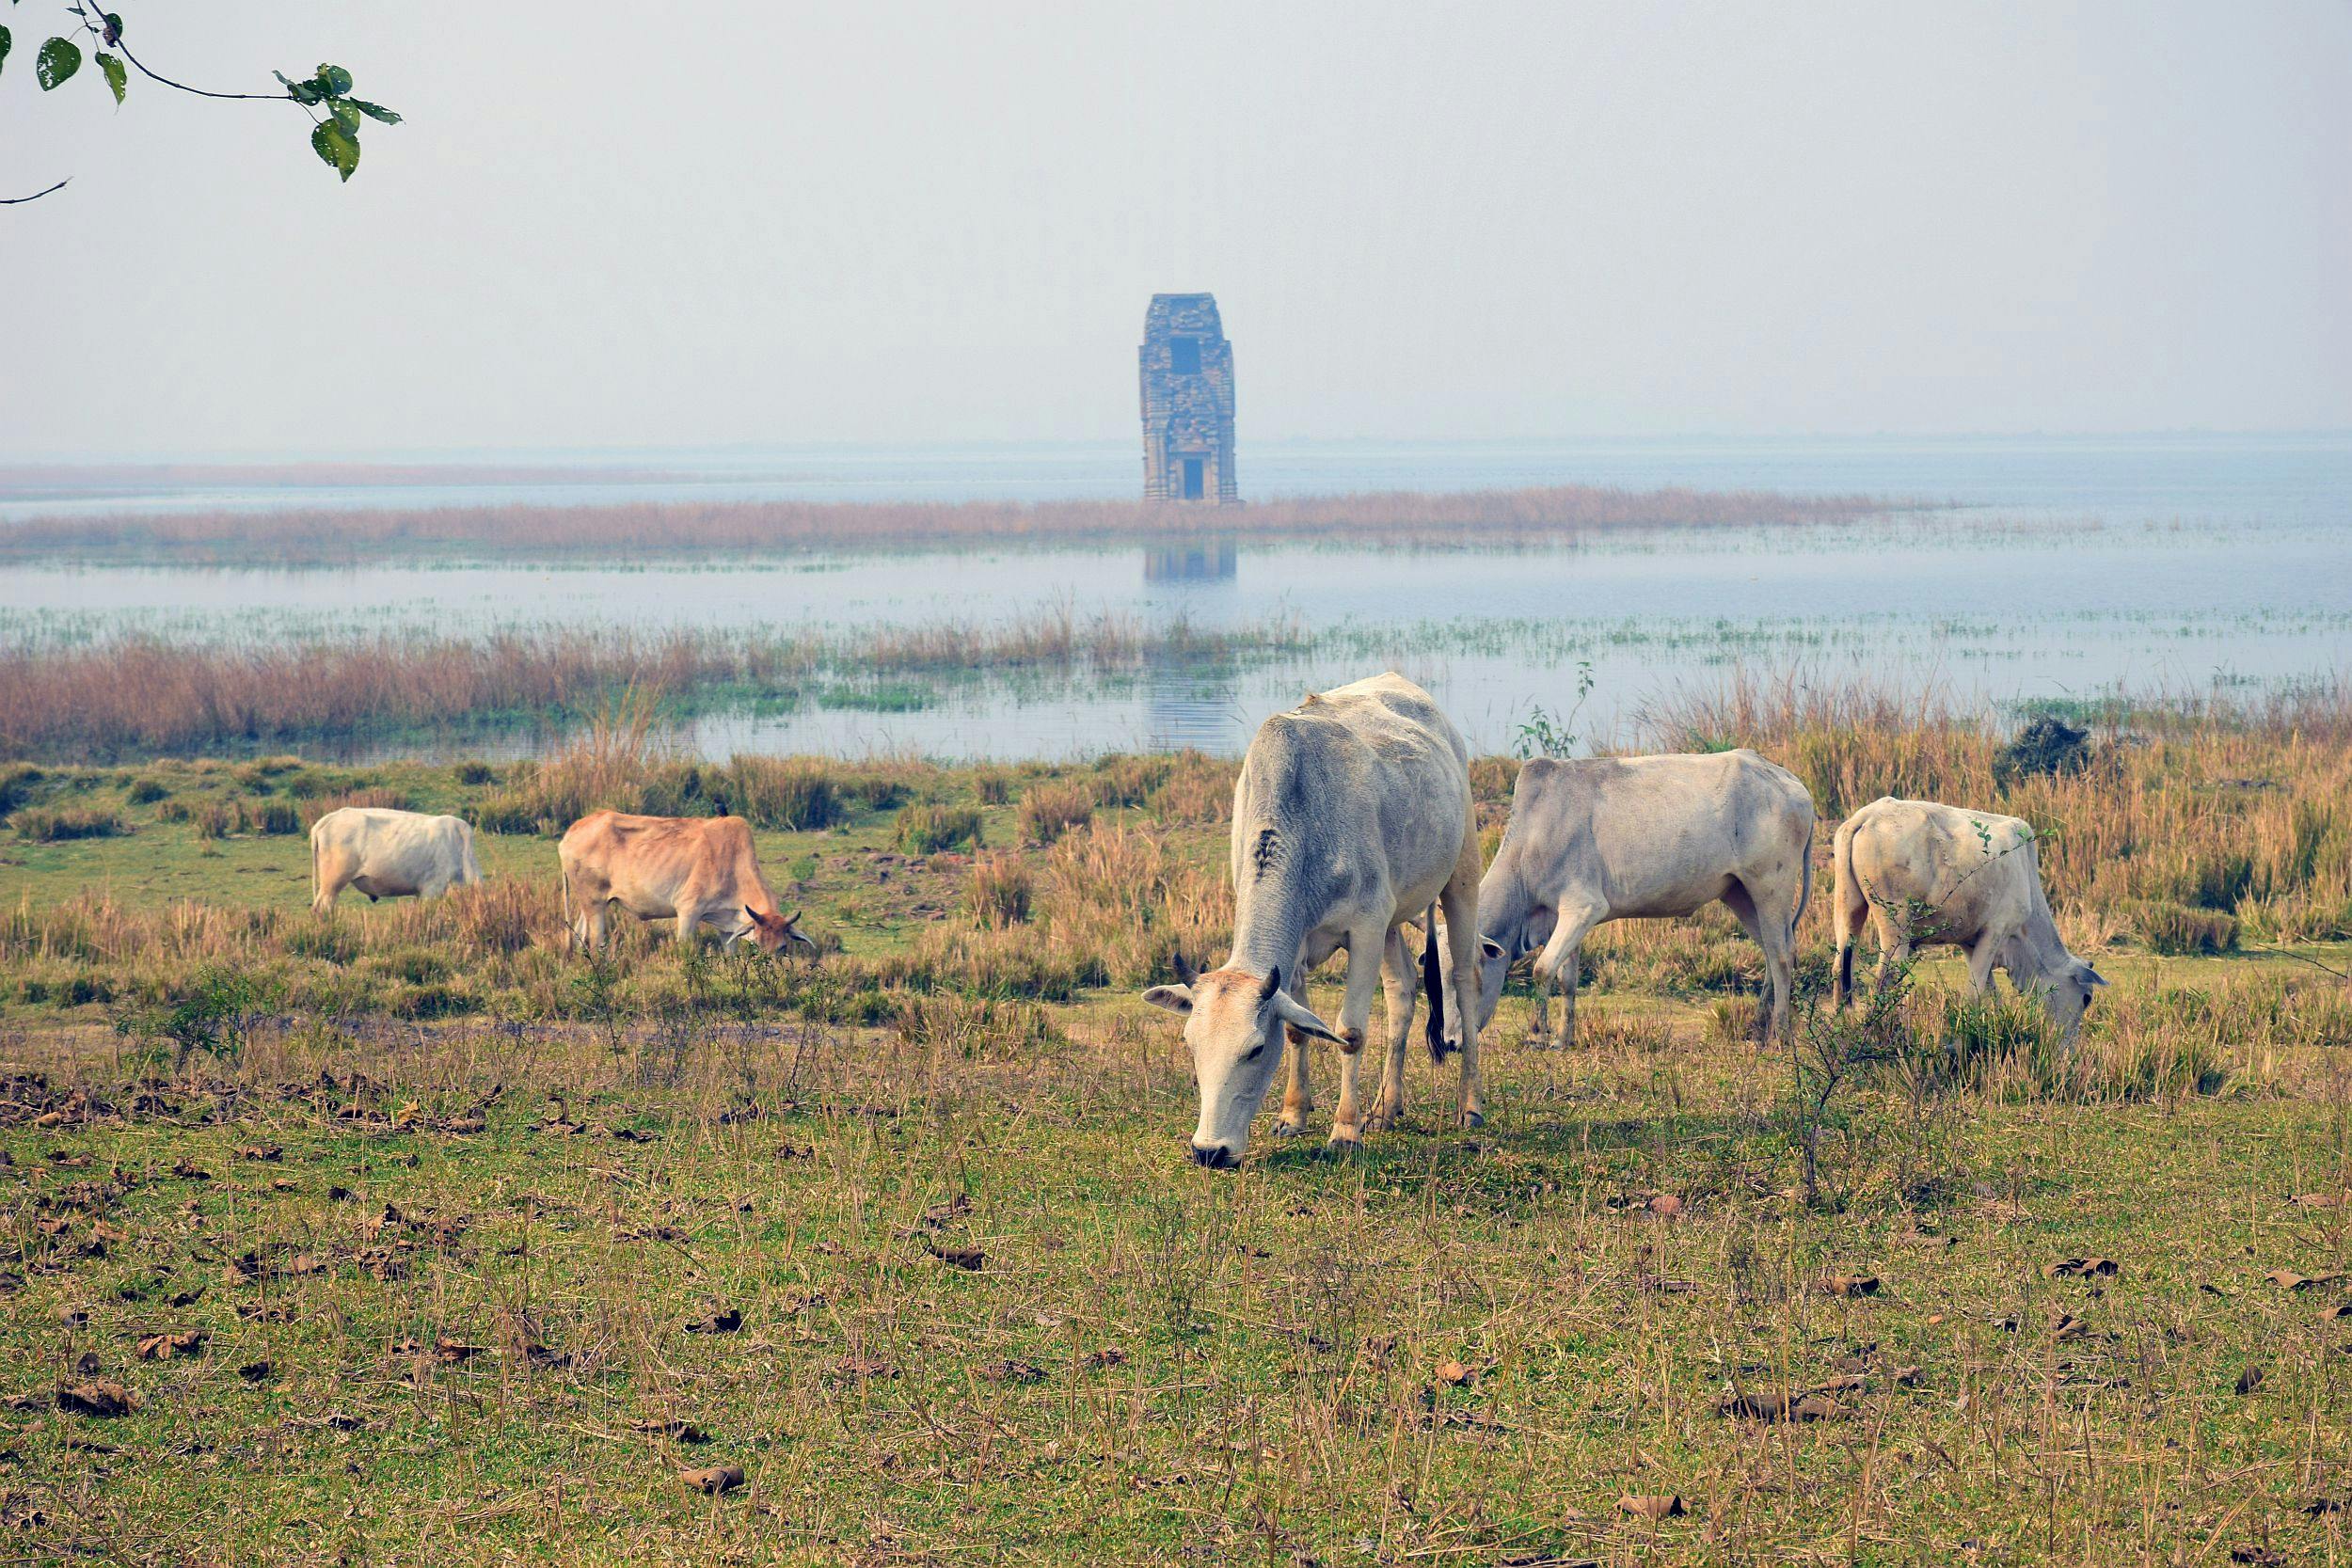  The temple located close to bank of Damodar at Telkupi during monsoon with cattles grazing in the foreground